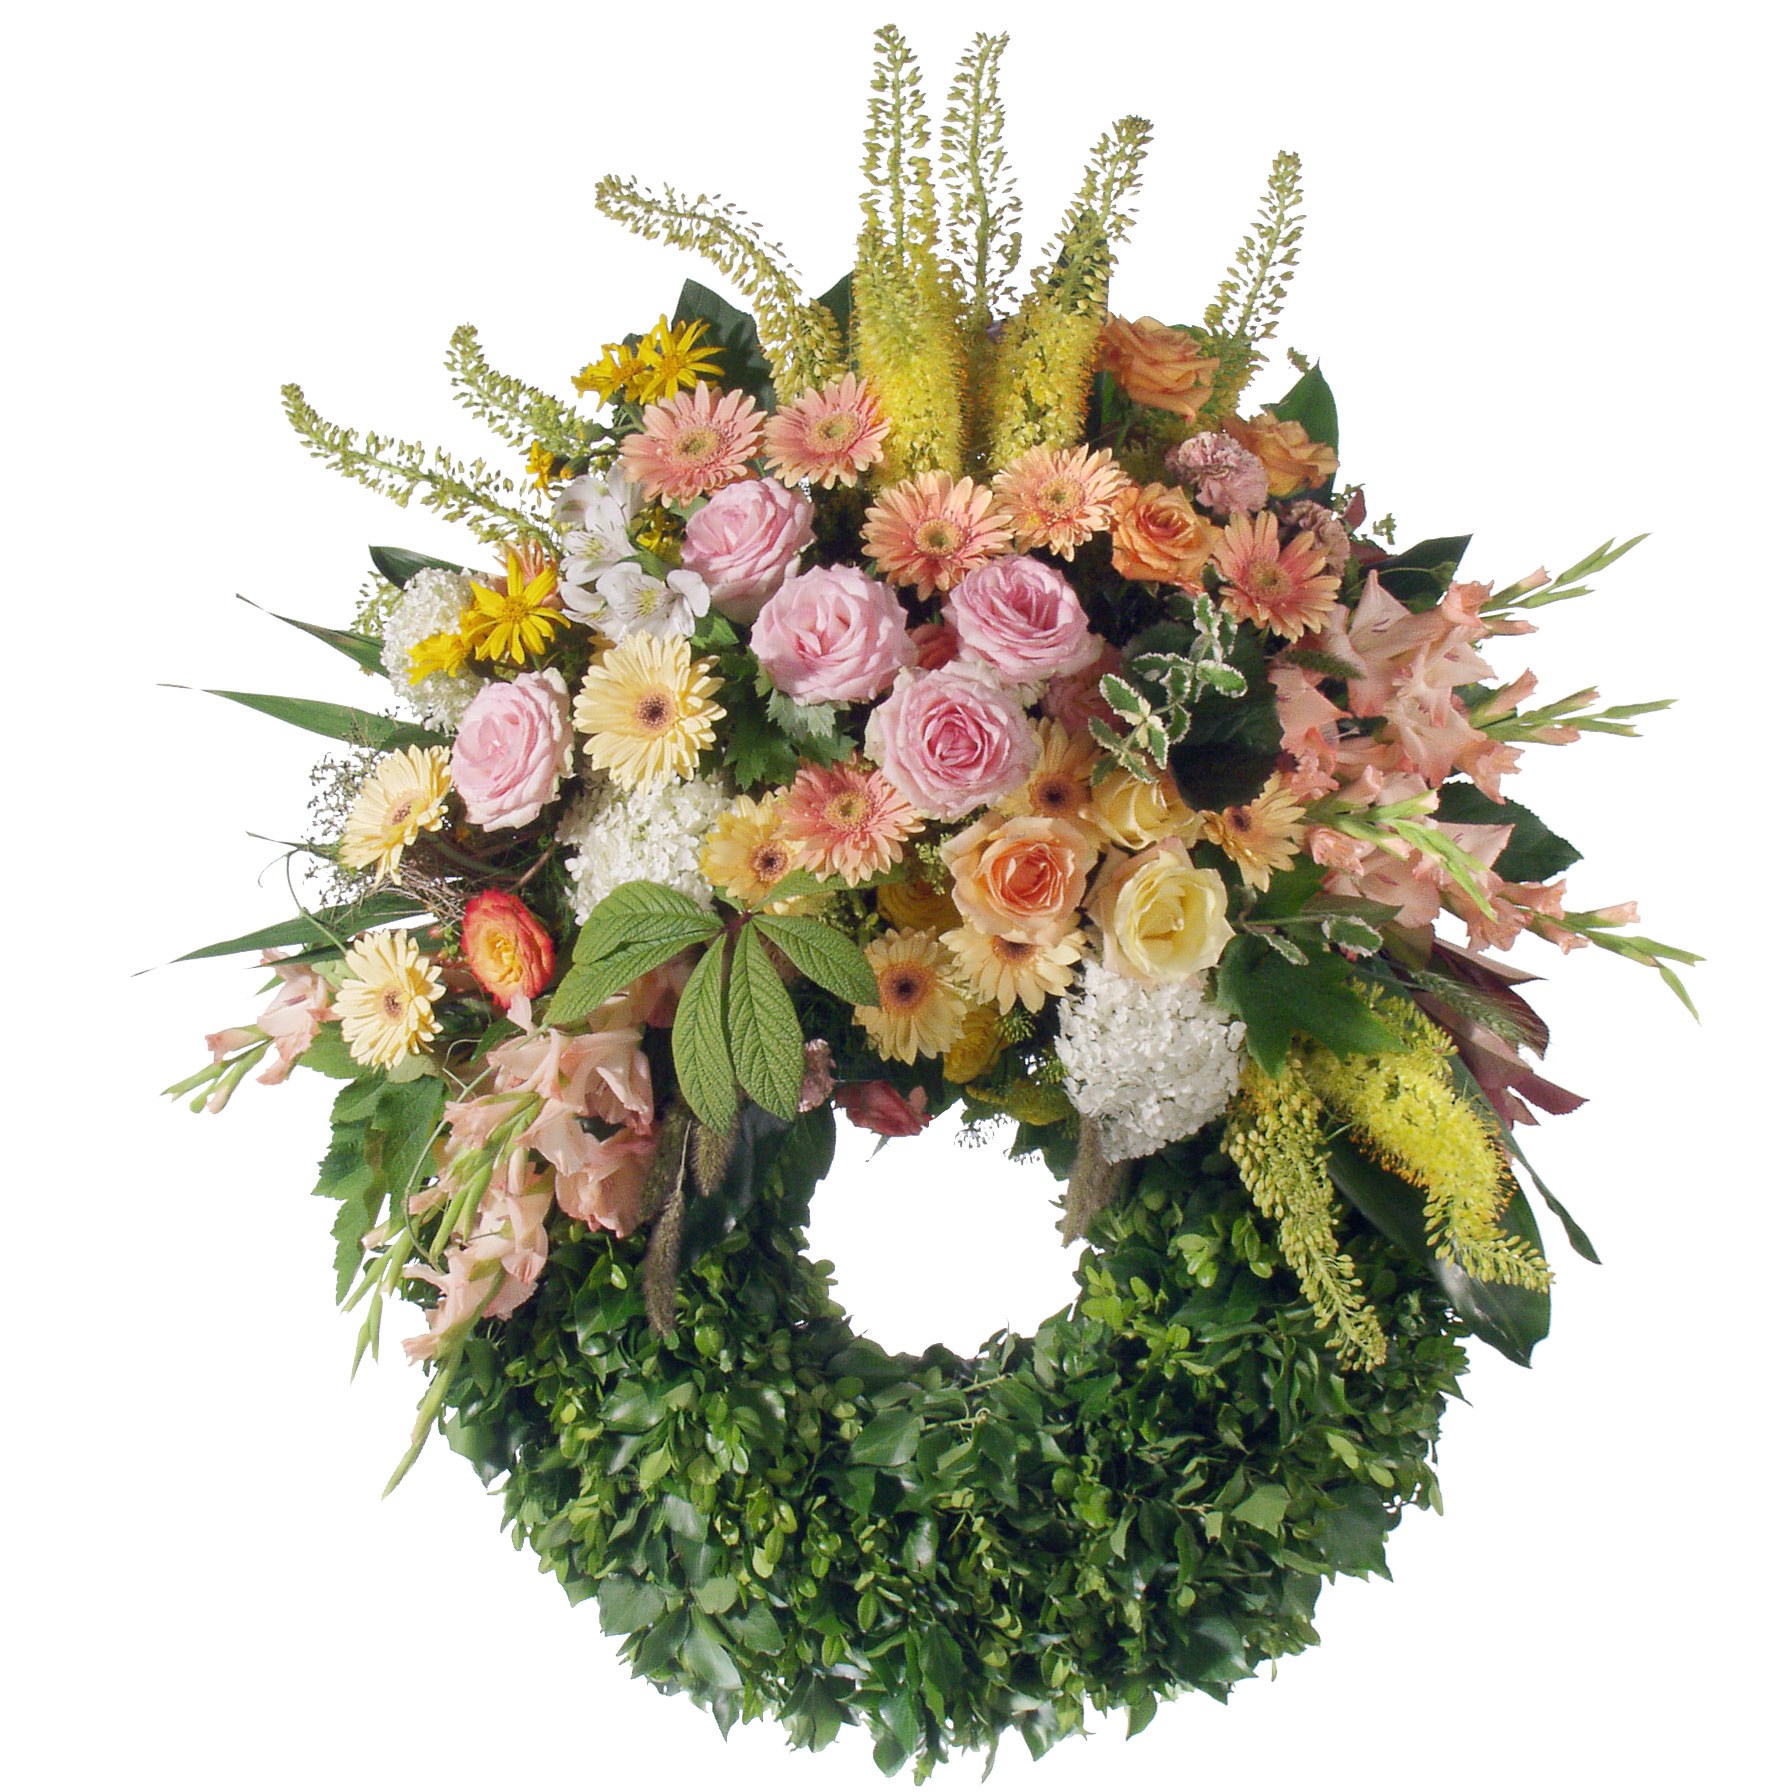 Wreath (For the Cemetery)